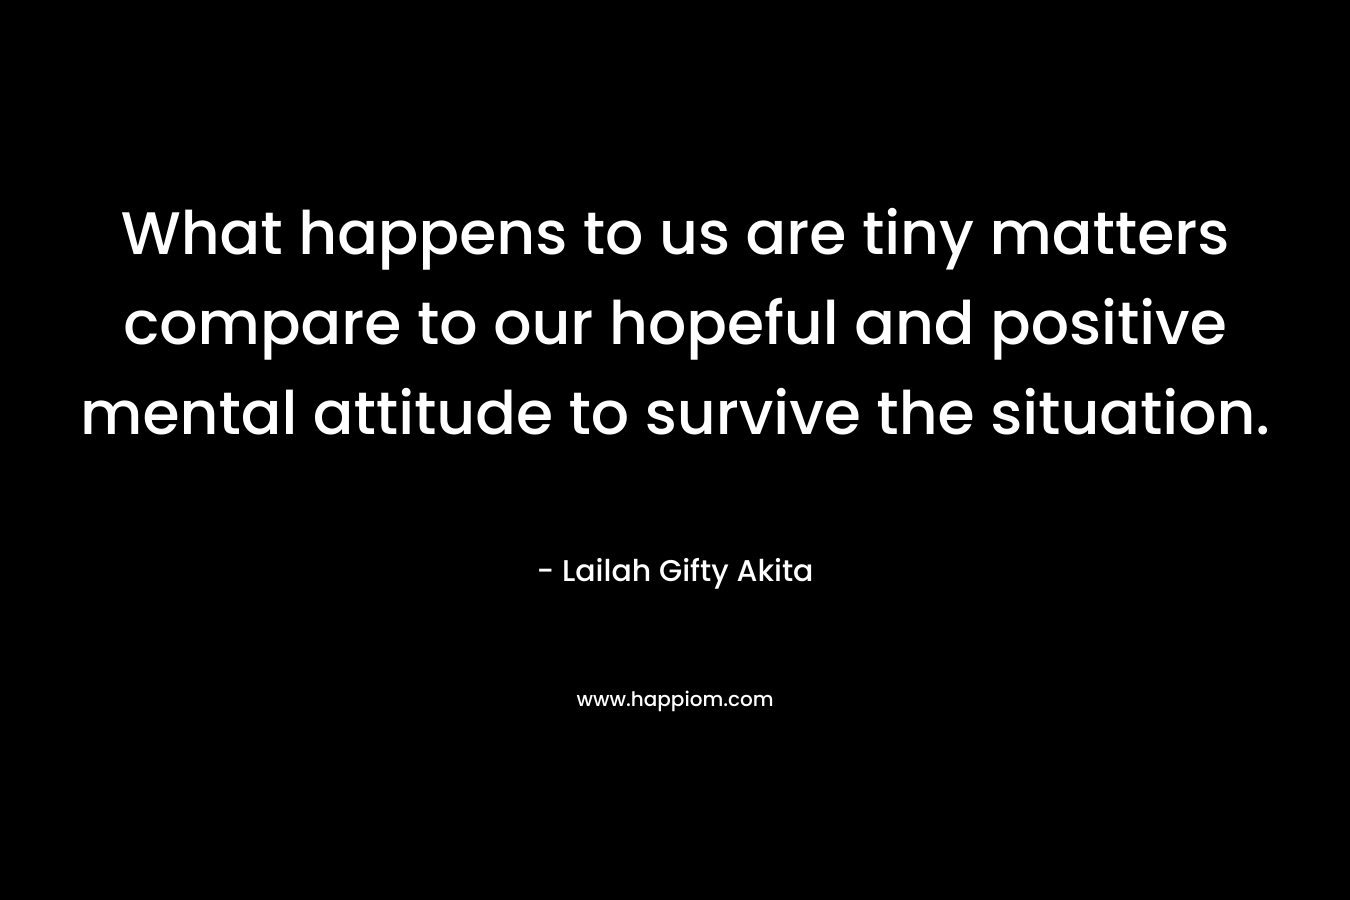 What happens to us are tiny matters compare to our hopeful and positive mental attitude to survive the situation.